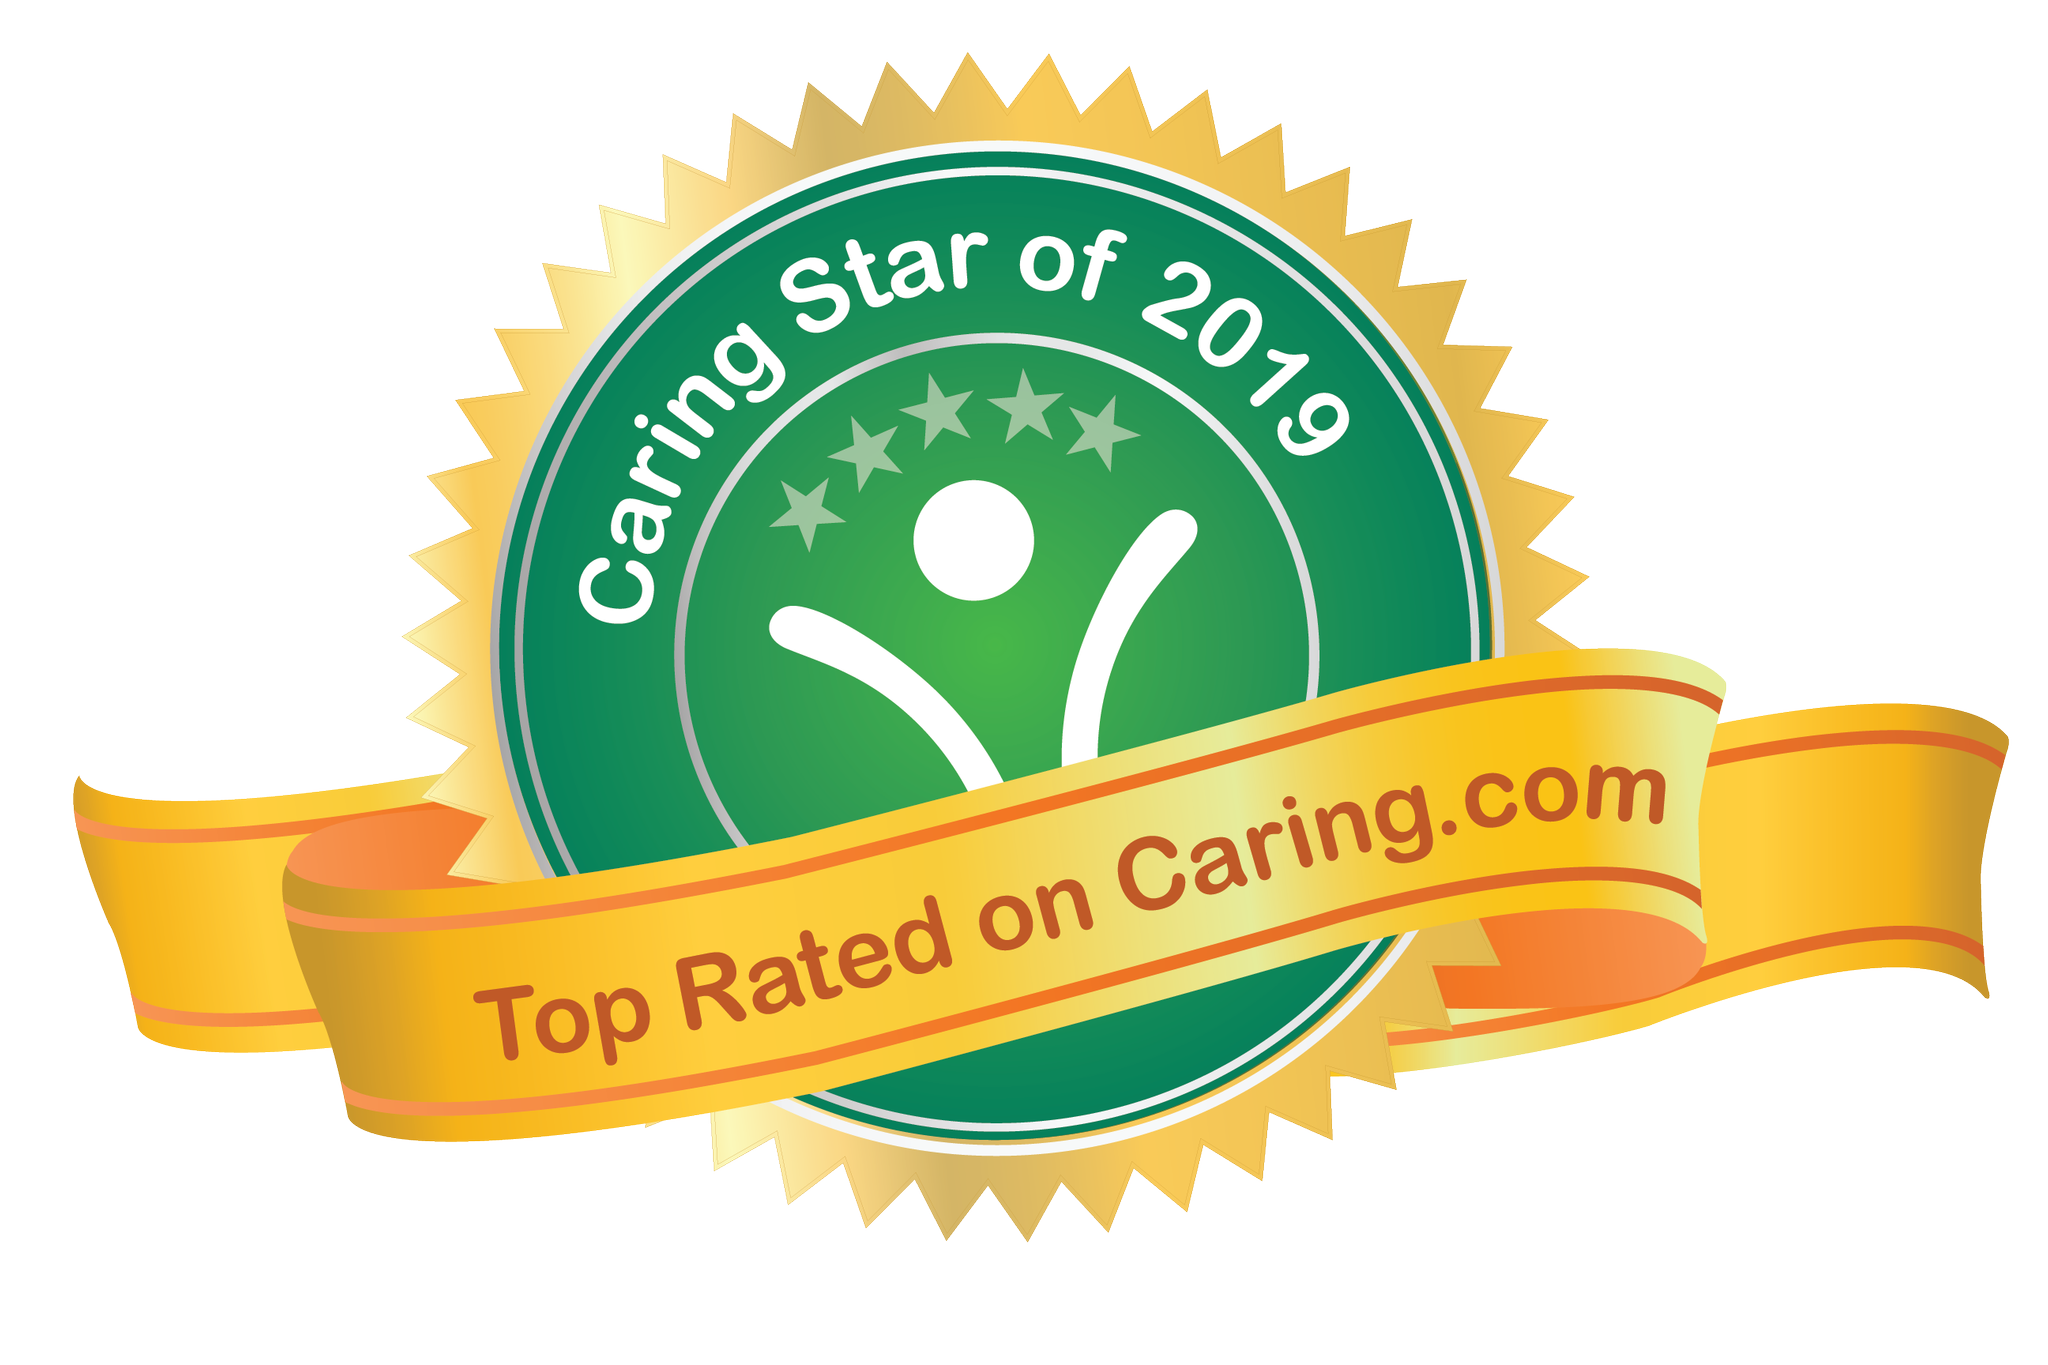 Caring Star of 2019, Top Rated on Caring.com